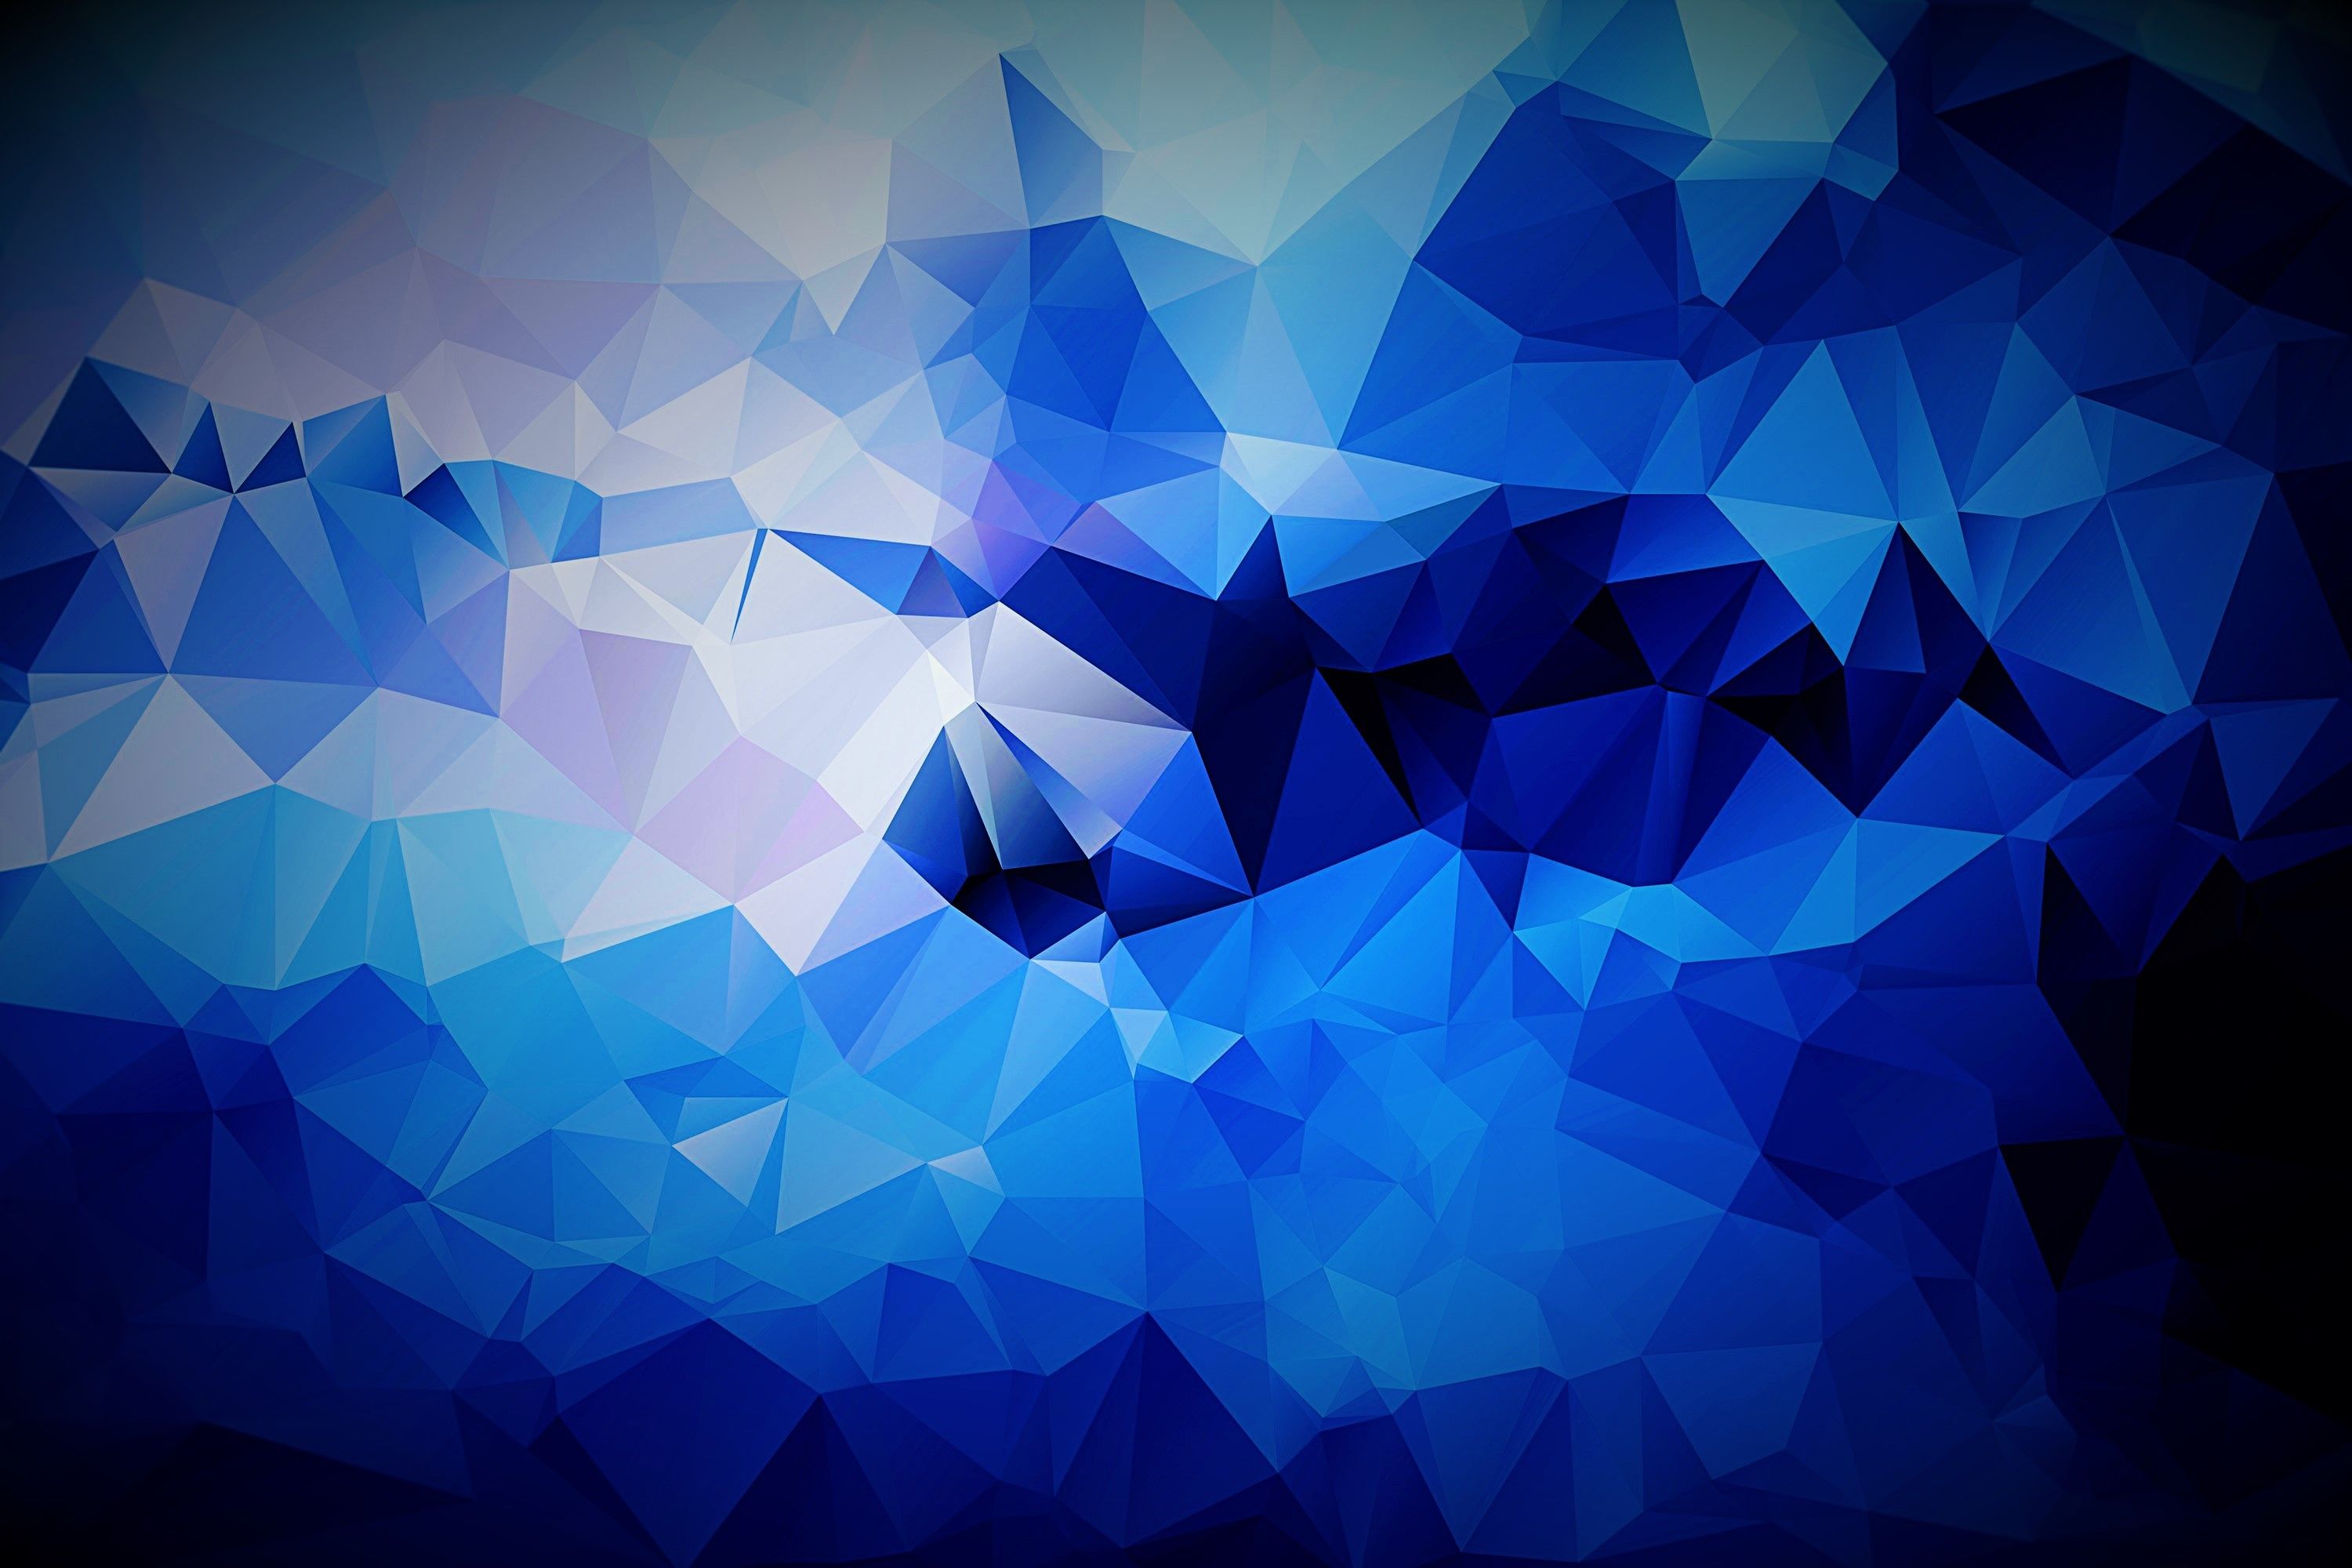 Blue Abstract Wallpapers on WallpaperDog